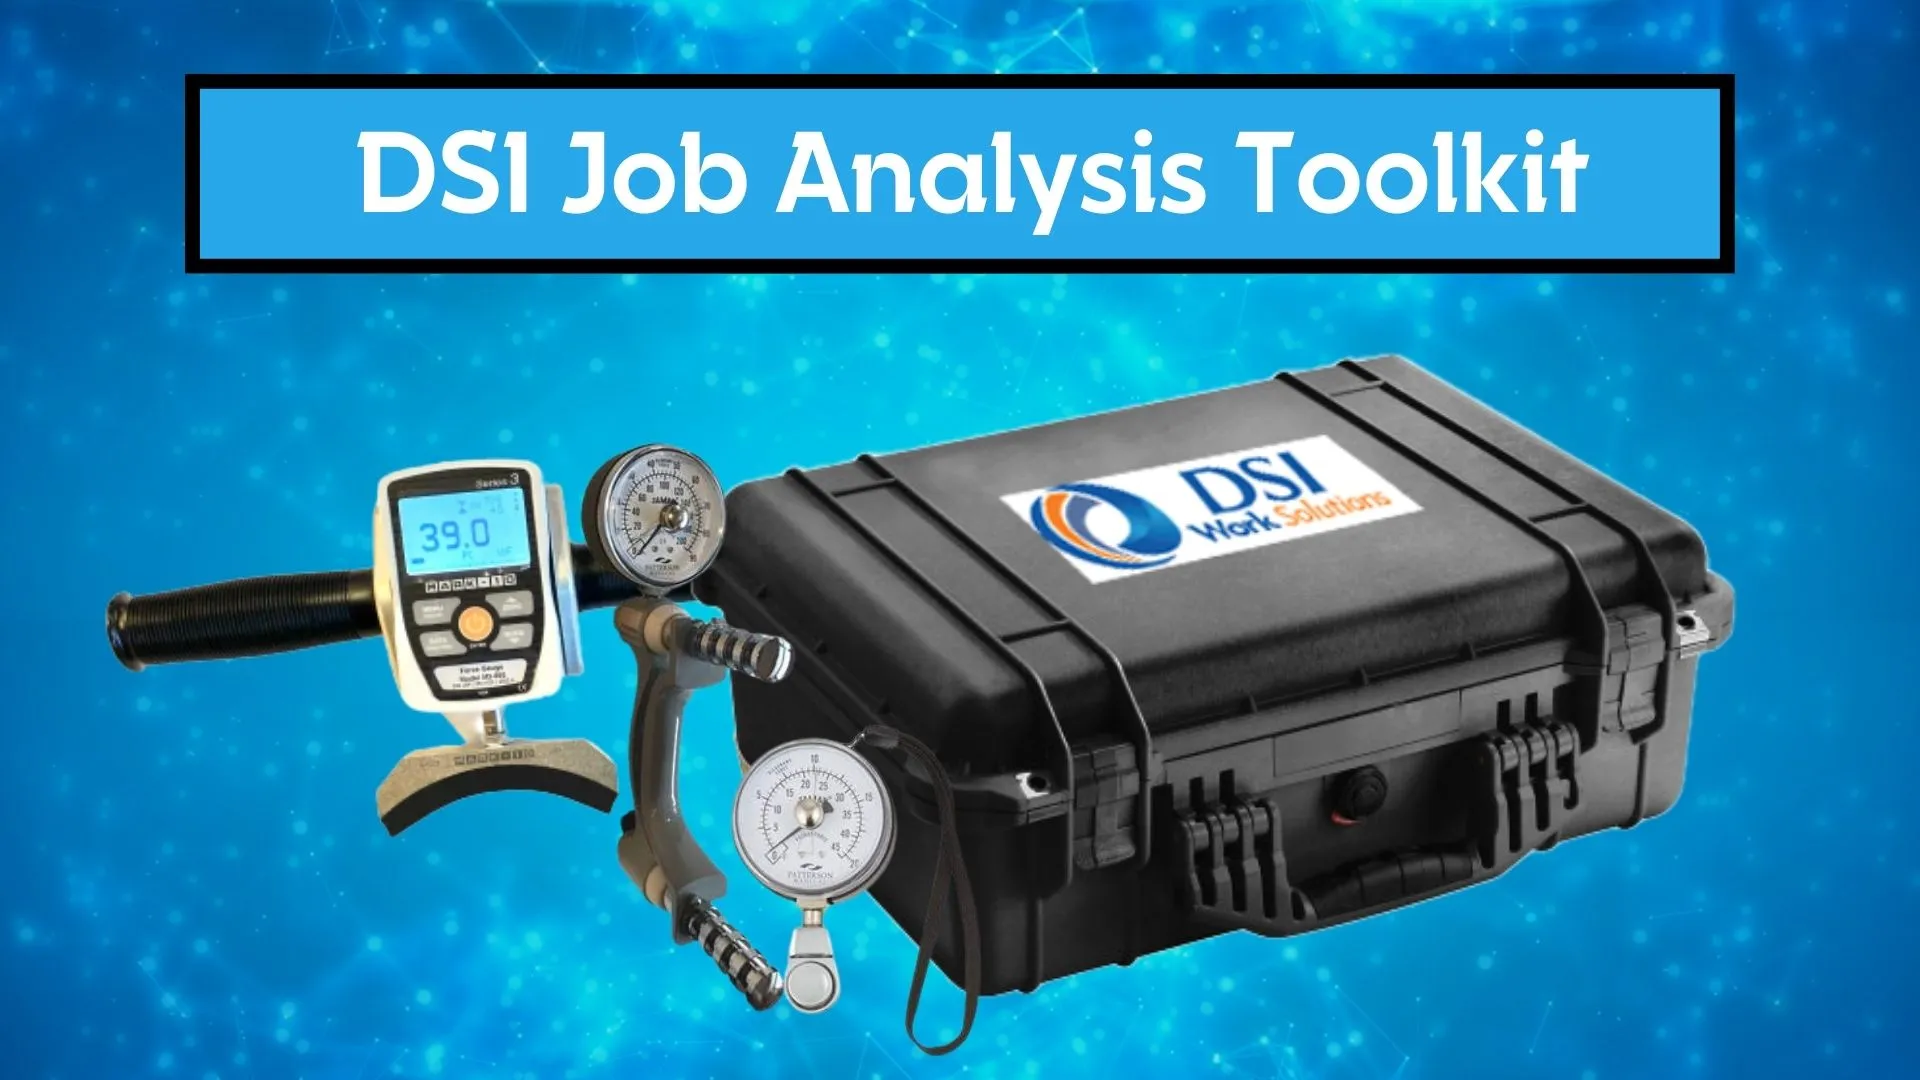 A Case with a Force Gauge, Grip Gauge, and Pinch Gauge are being displayed in front of a blue background with the words "DSI Job Analysis Kit" above them.